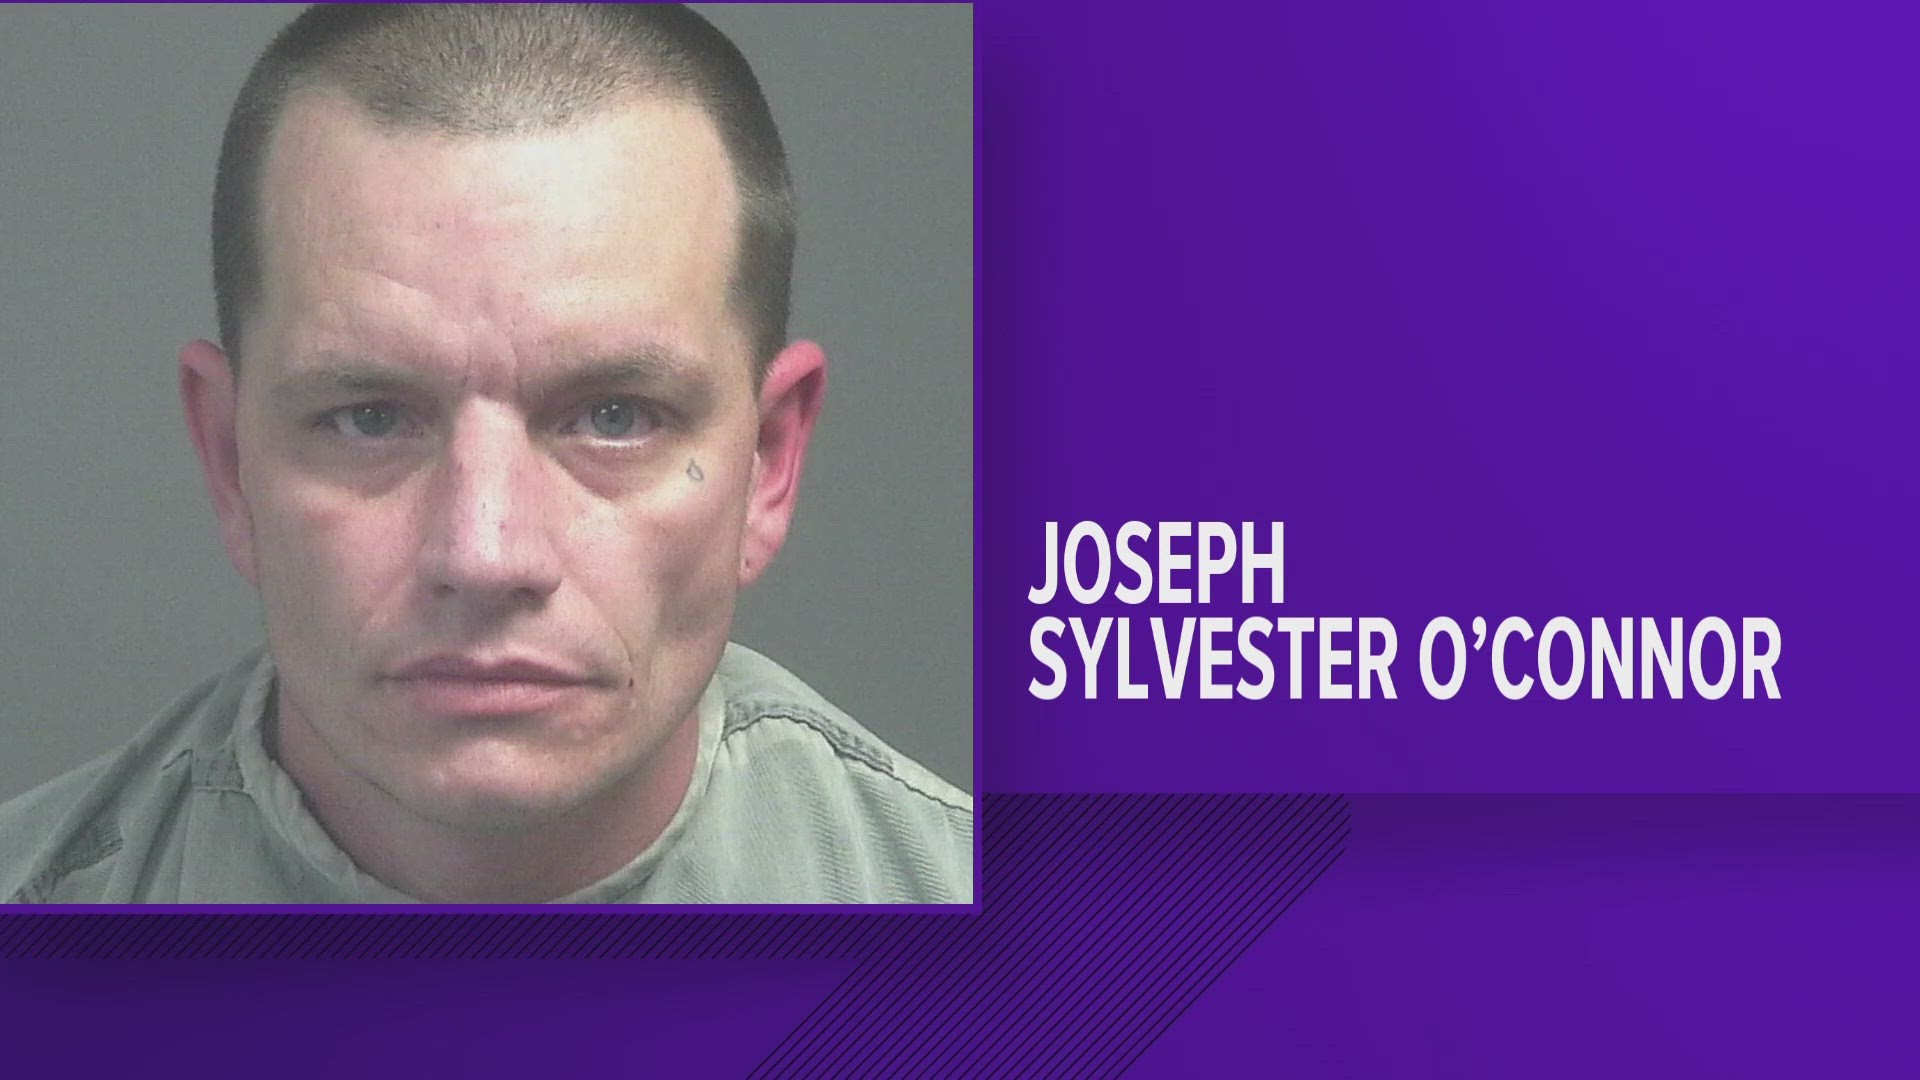 40-year-old, Joseph Sylvester O’Connor supplied fentanyl and acetyl fentanyl to a man's overdose.